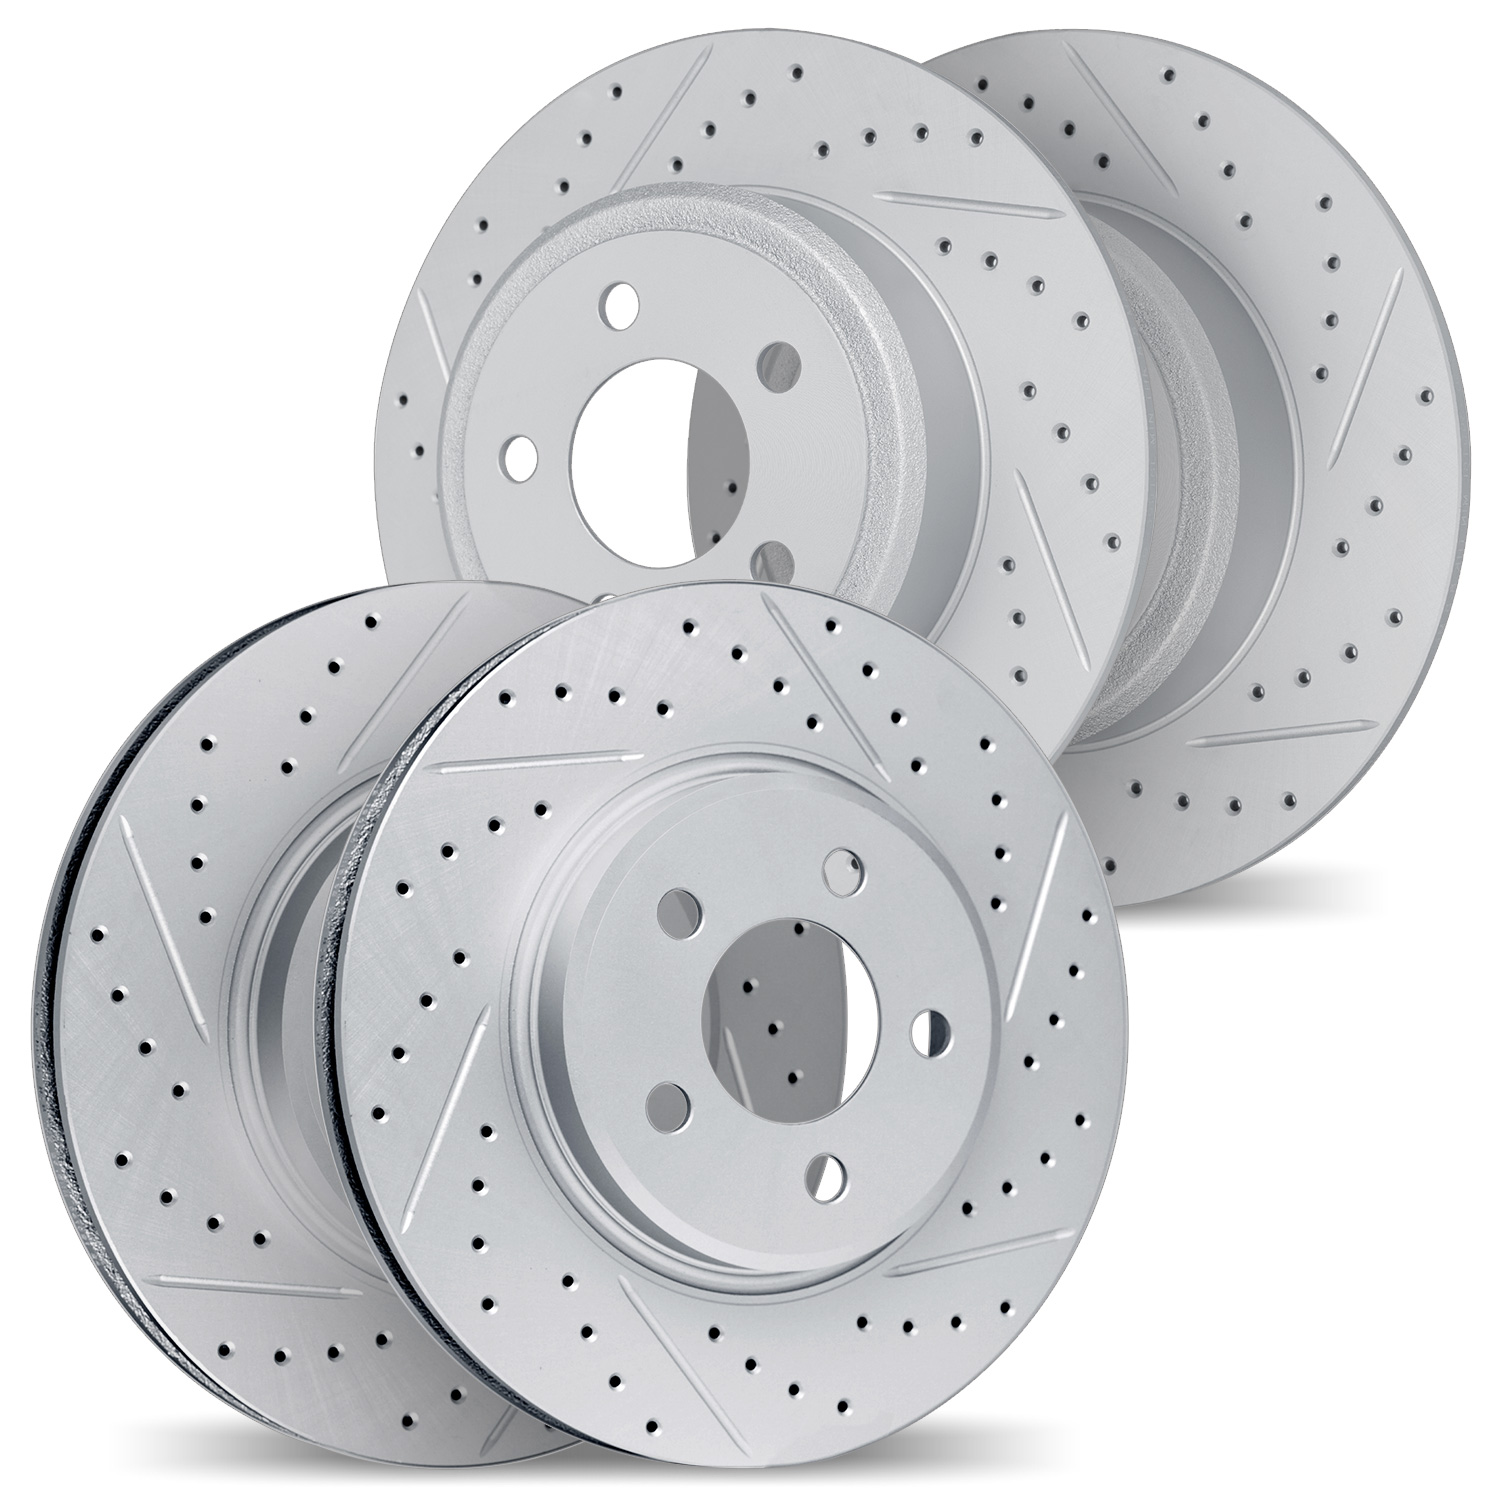 2004-58016 Geoperformance Drilled/Slotted Brake Rotors, Fits Select Acura/Honda, Position: Front and Rear